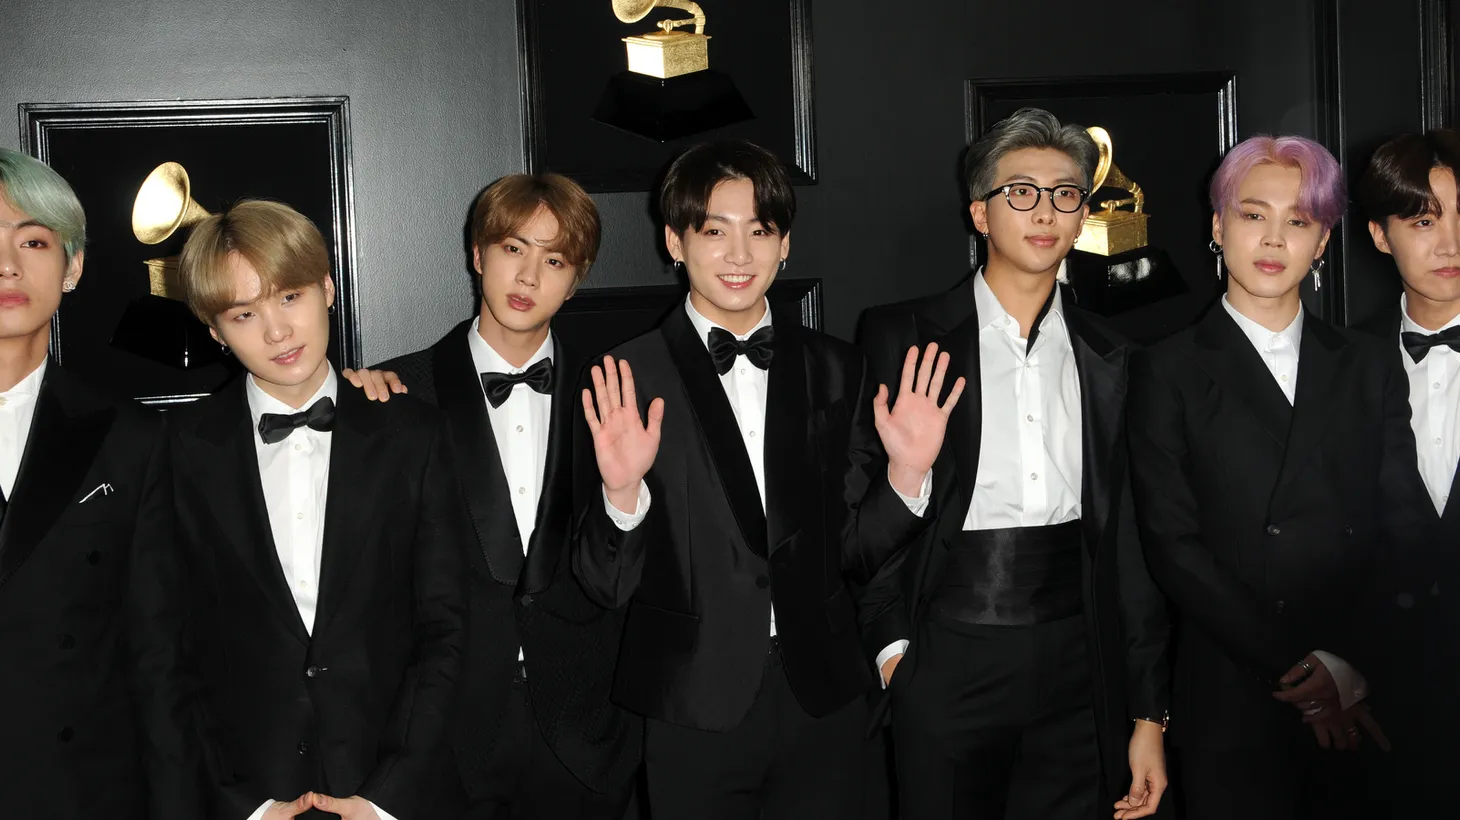 Five things to know about BTS as K-pop sensation makes 'Saturday